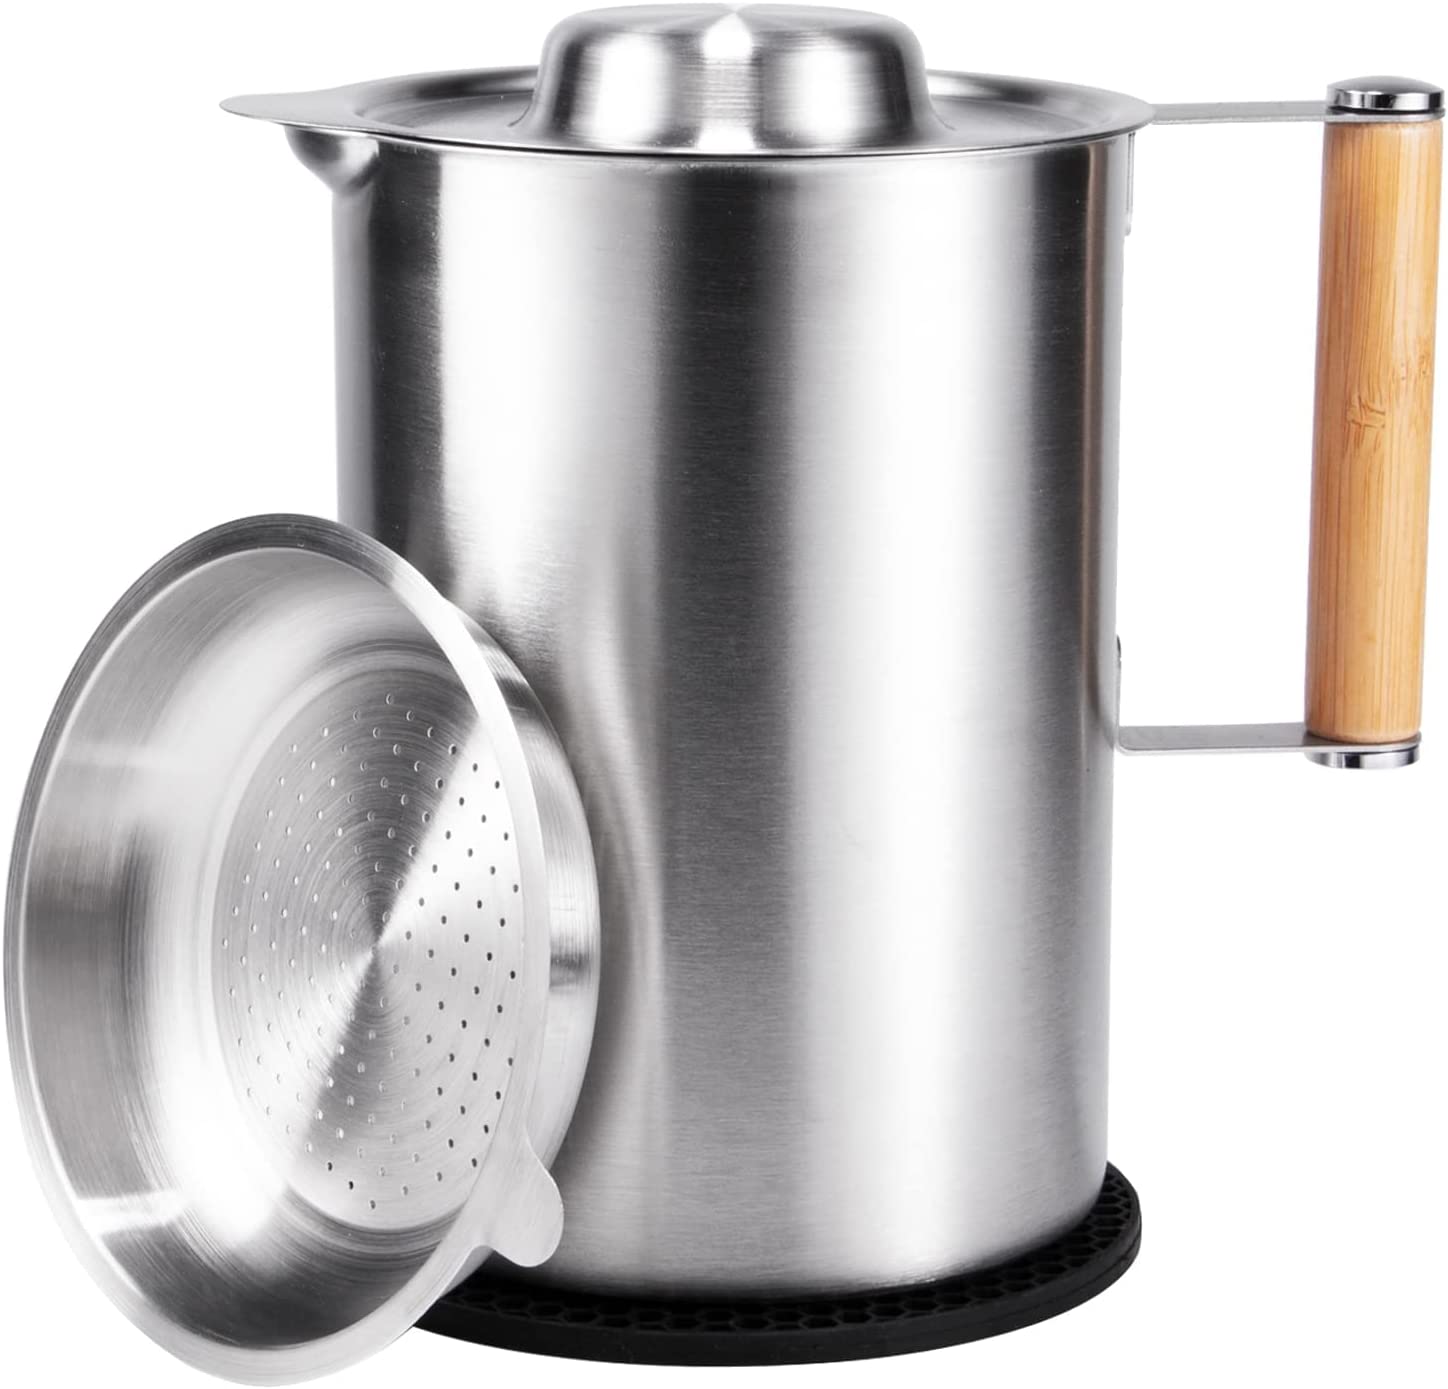 Stainless Steel Bacon Grease Container Oil Storage with Strainer